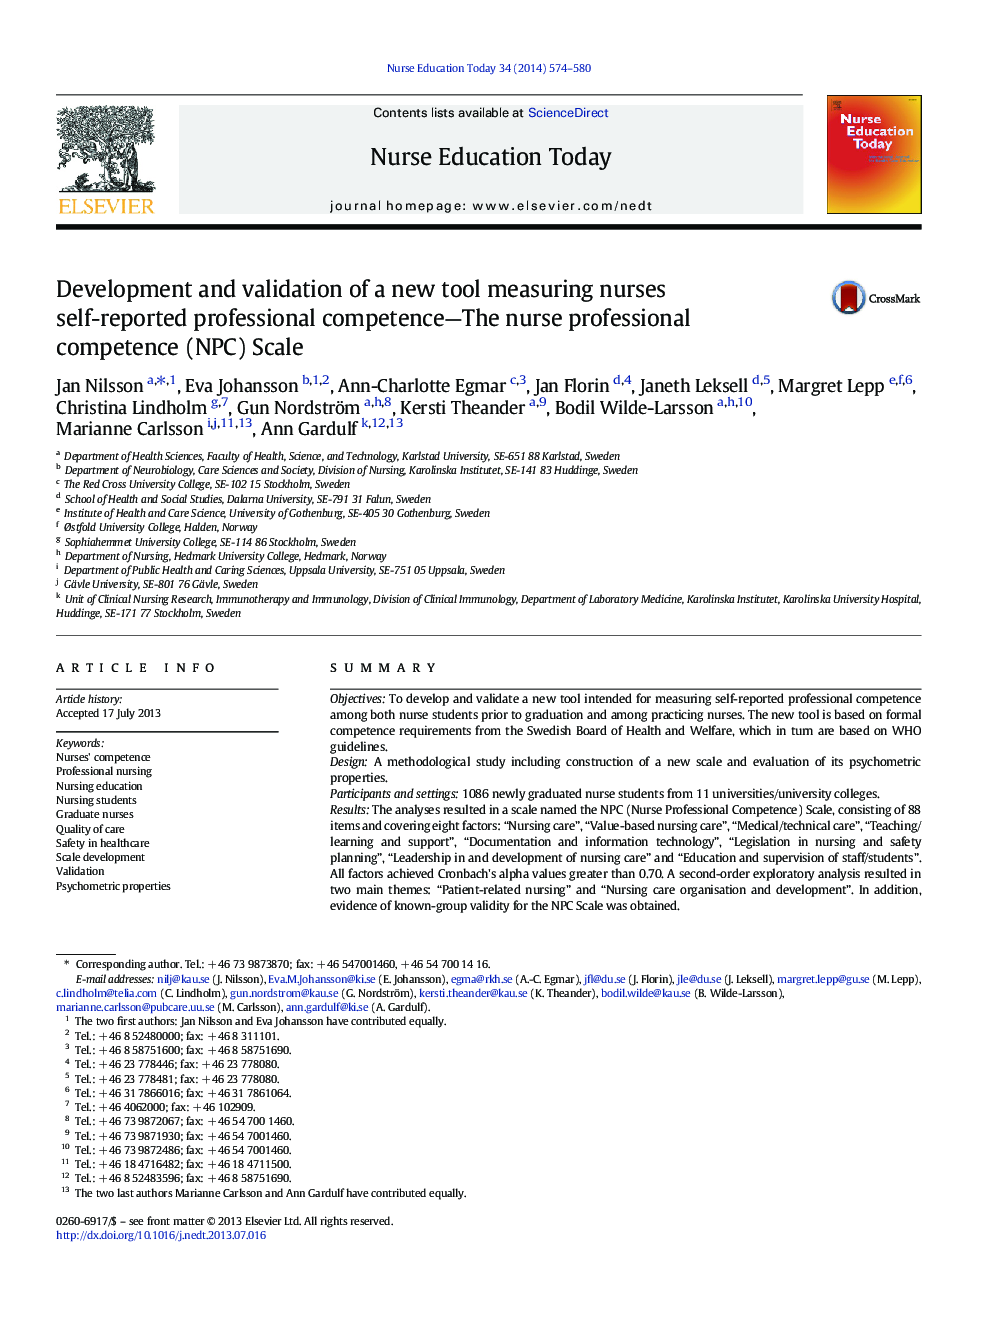 Development and validation of a new tool measuring nurses self-reported professional competence-The nurse professional competence (NPC) Scale